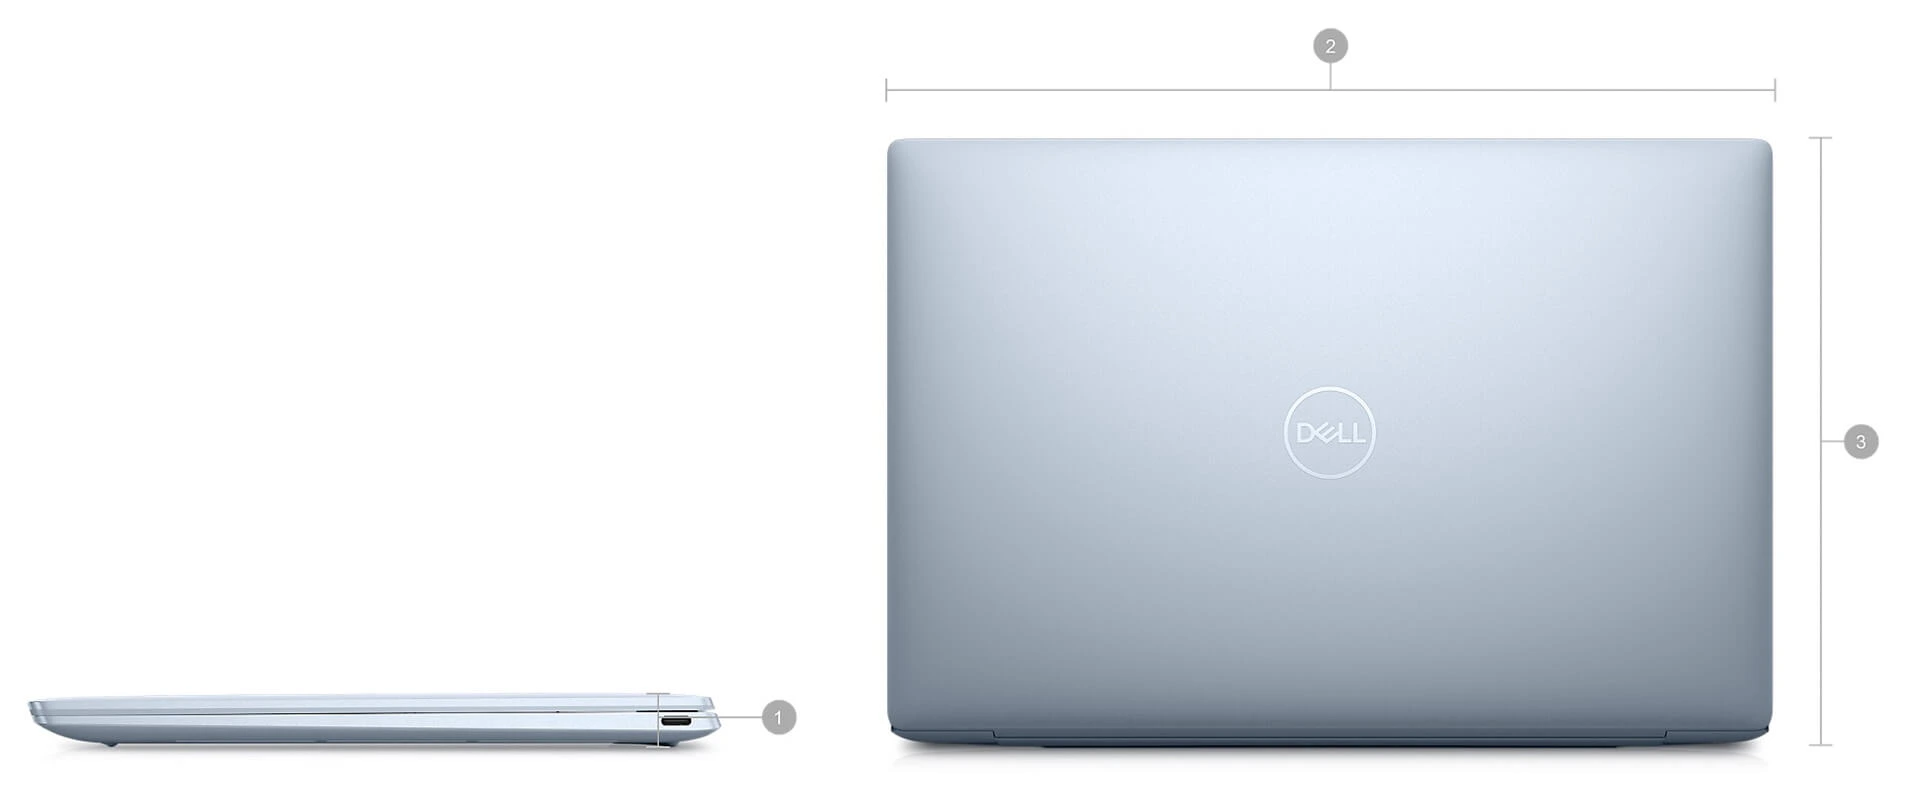 Dell Xps 13 9315 (2022) Features 05